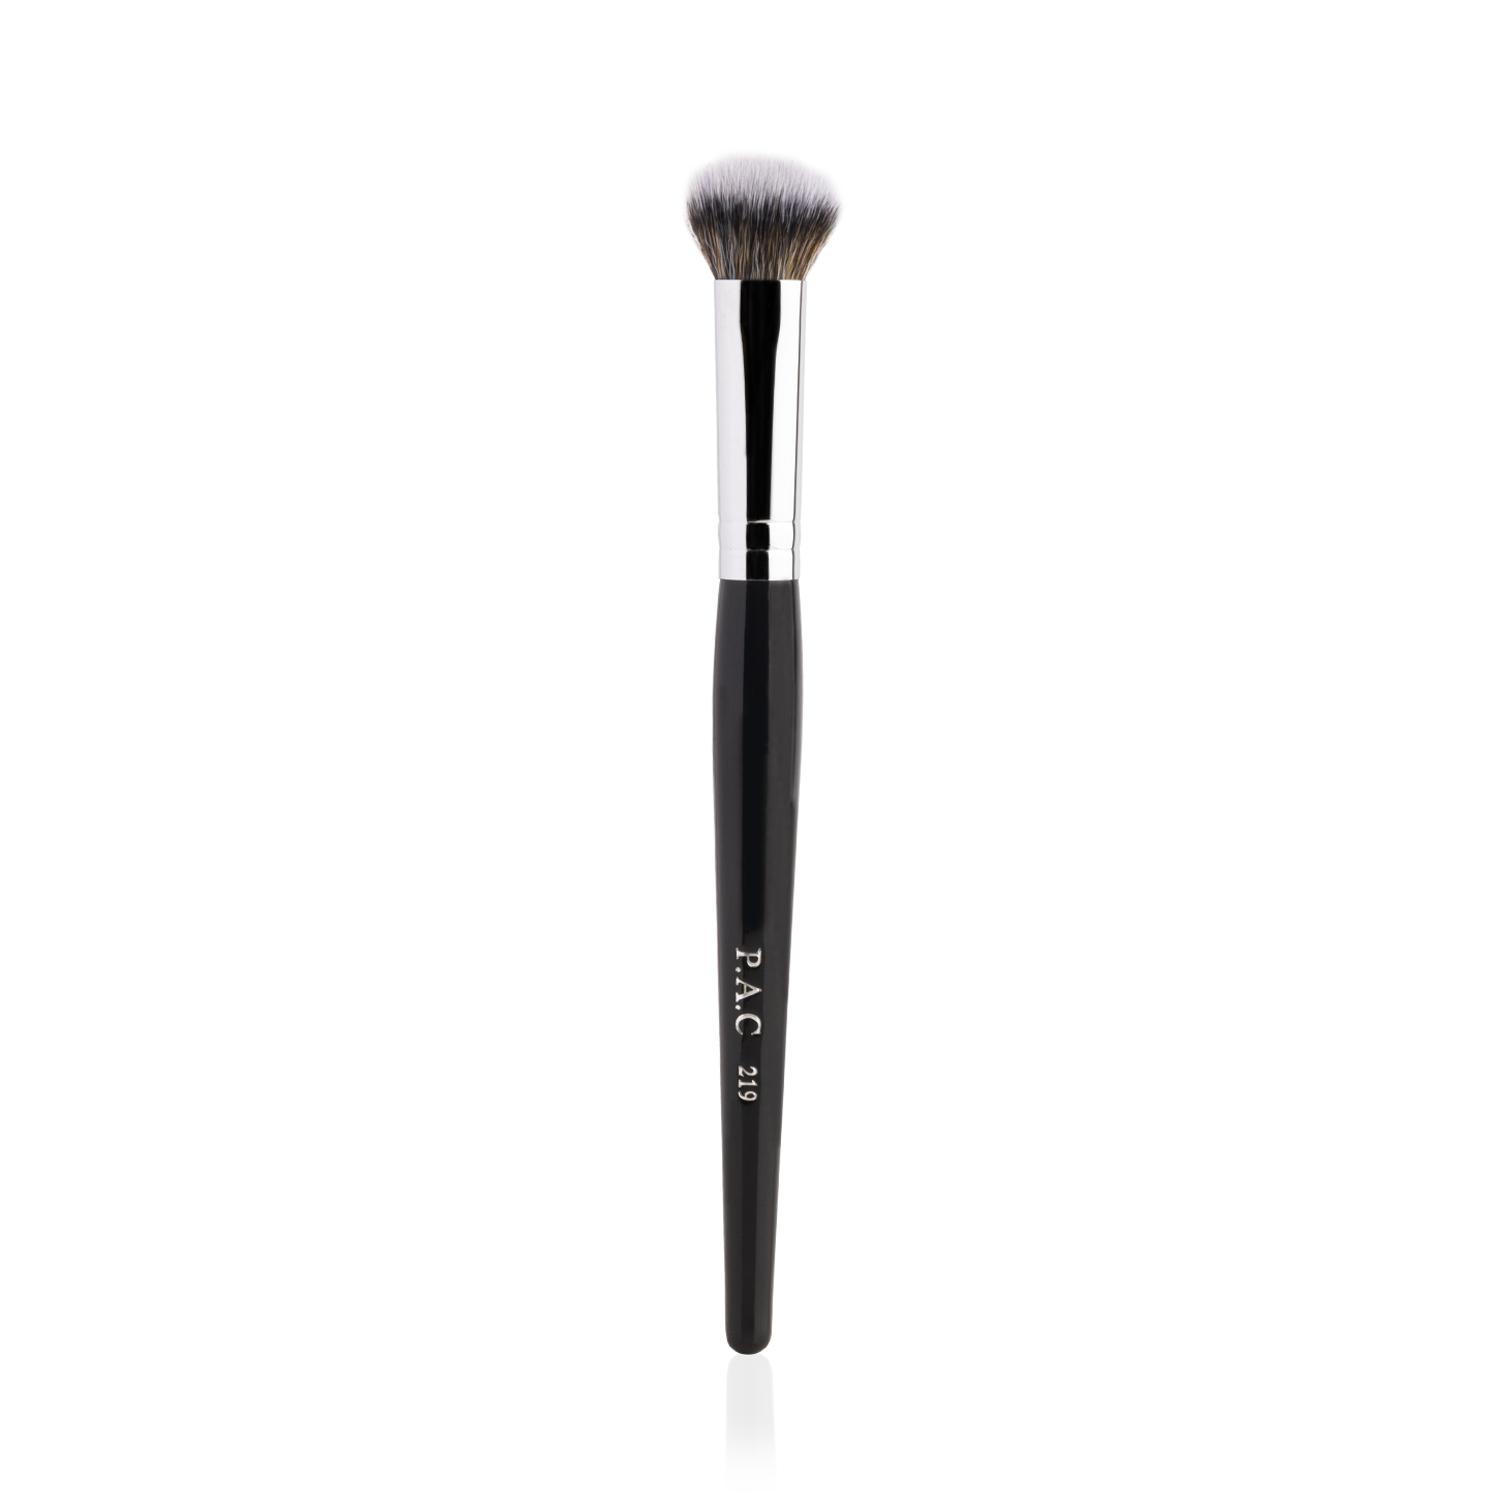 PAC | PAC Concealer Brush - 219 (1Pc)